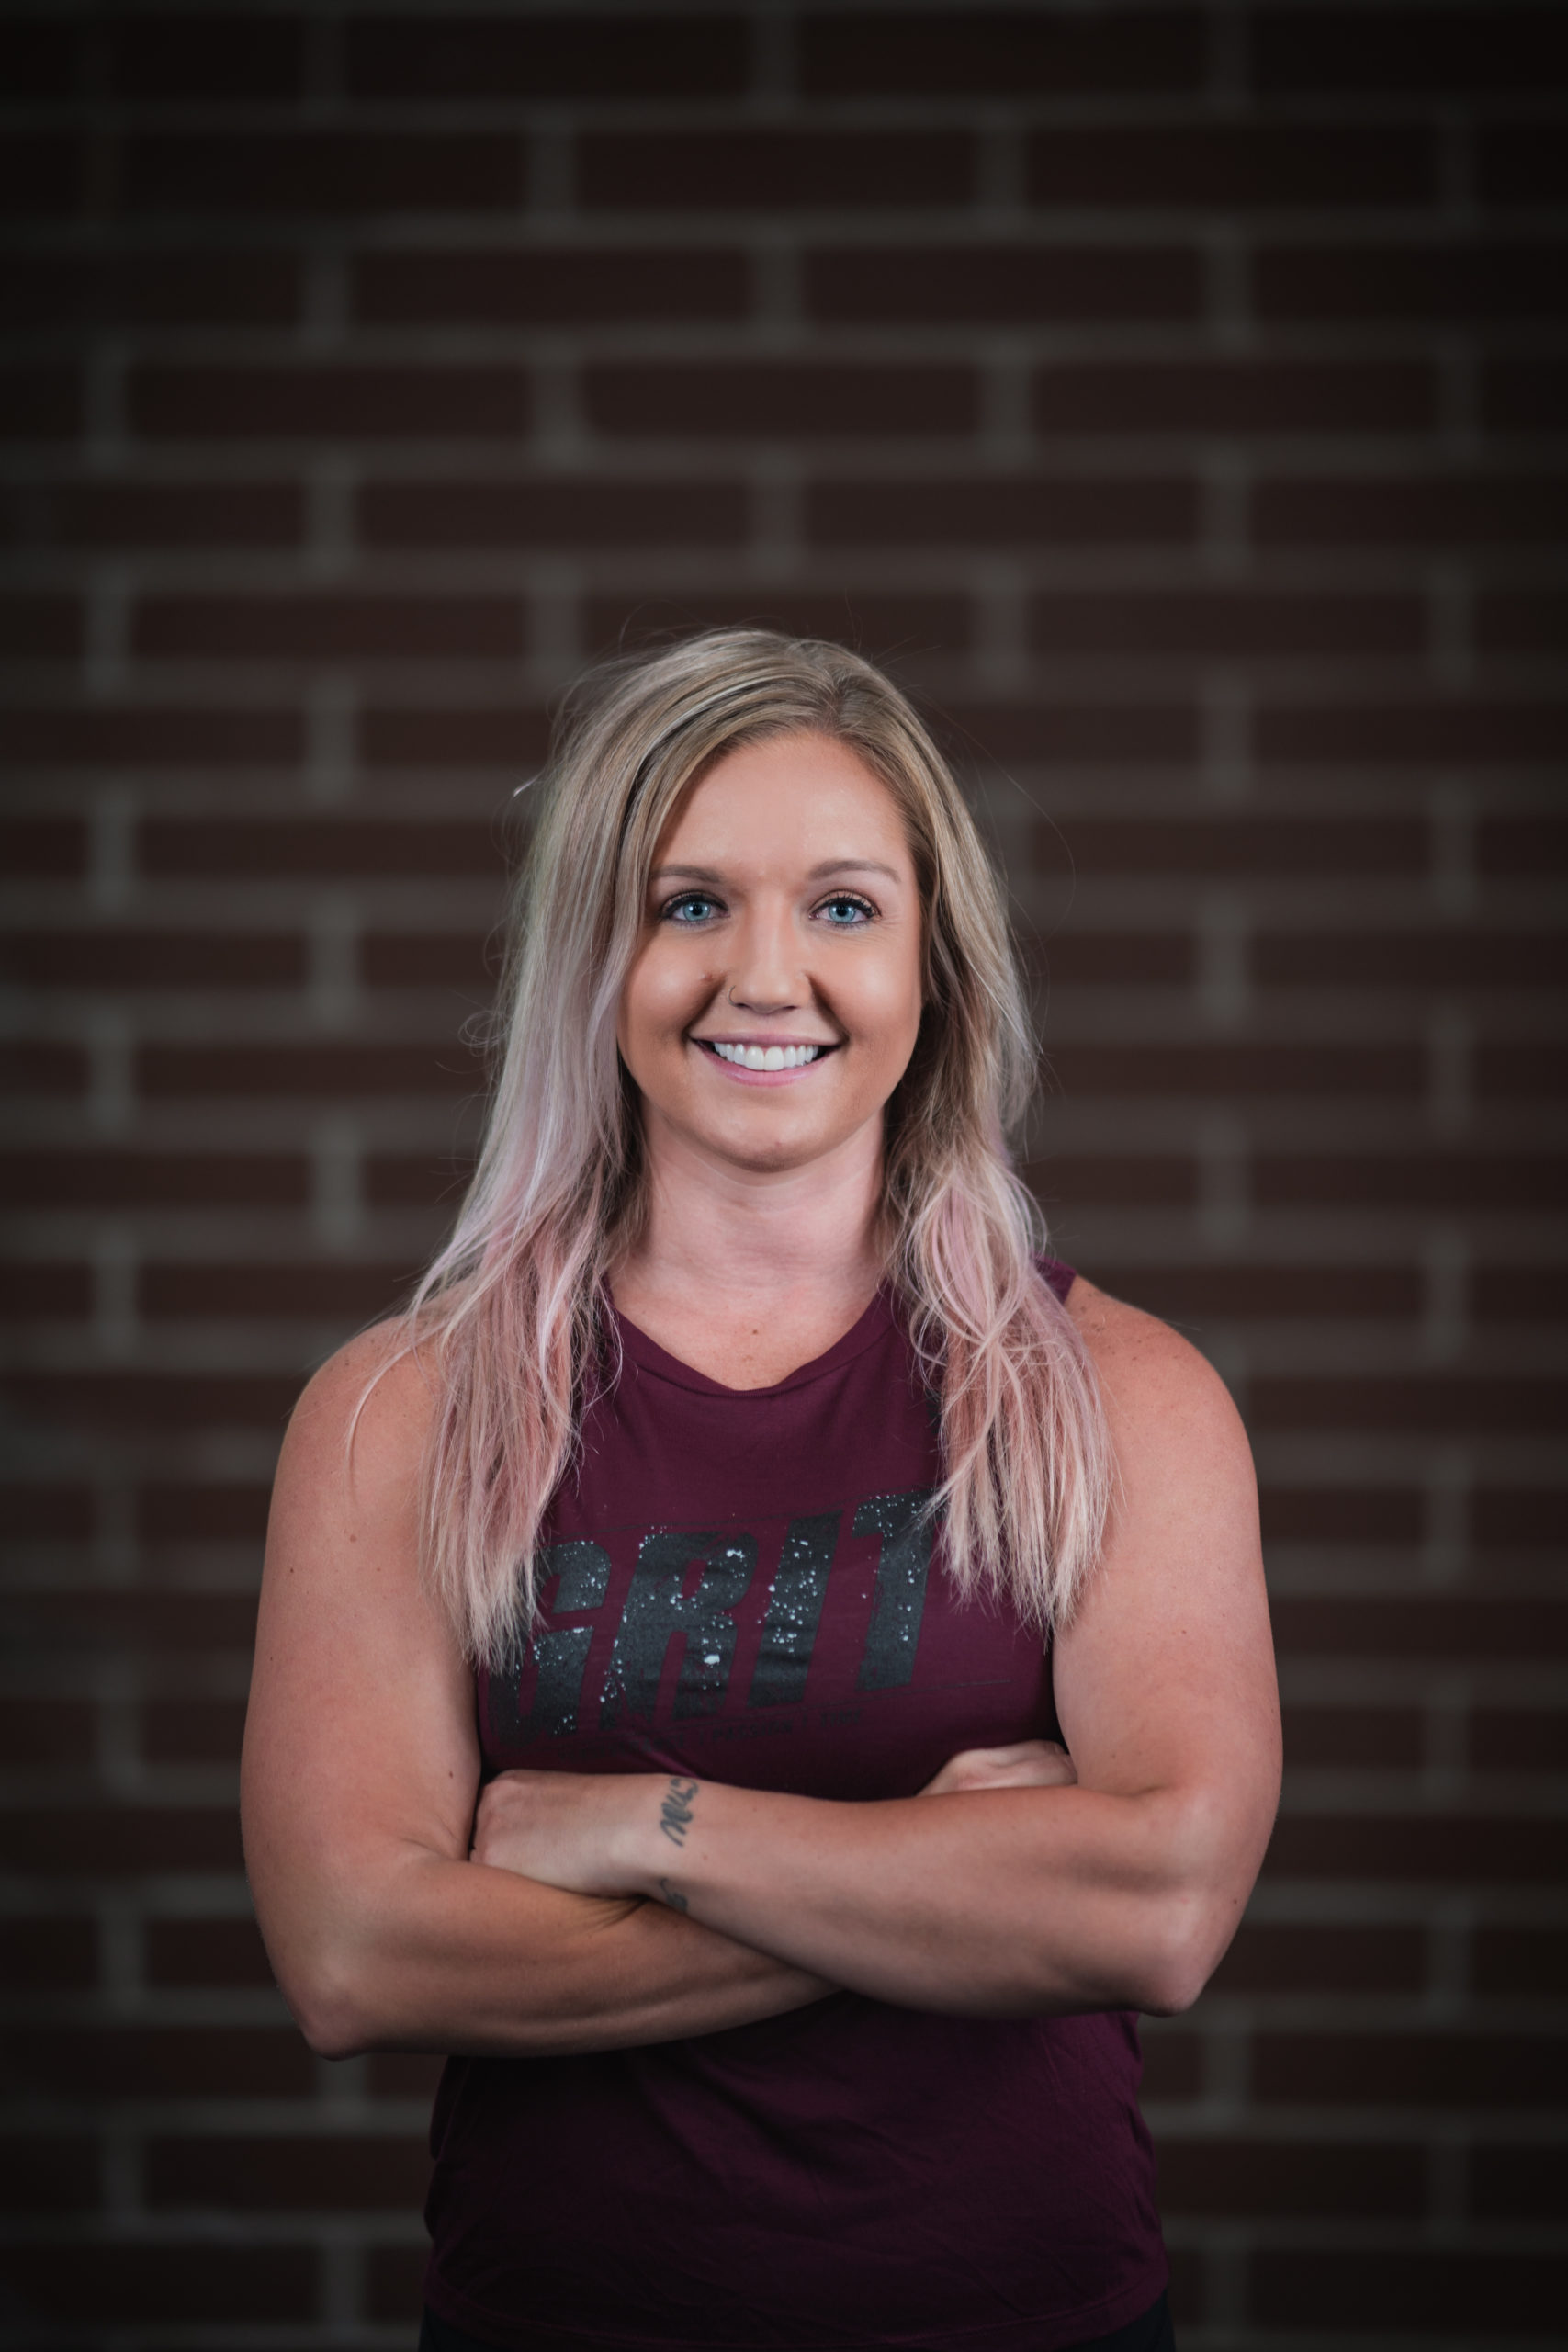 portrait of woman who is an at home coach for strength training and physique